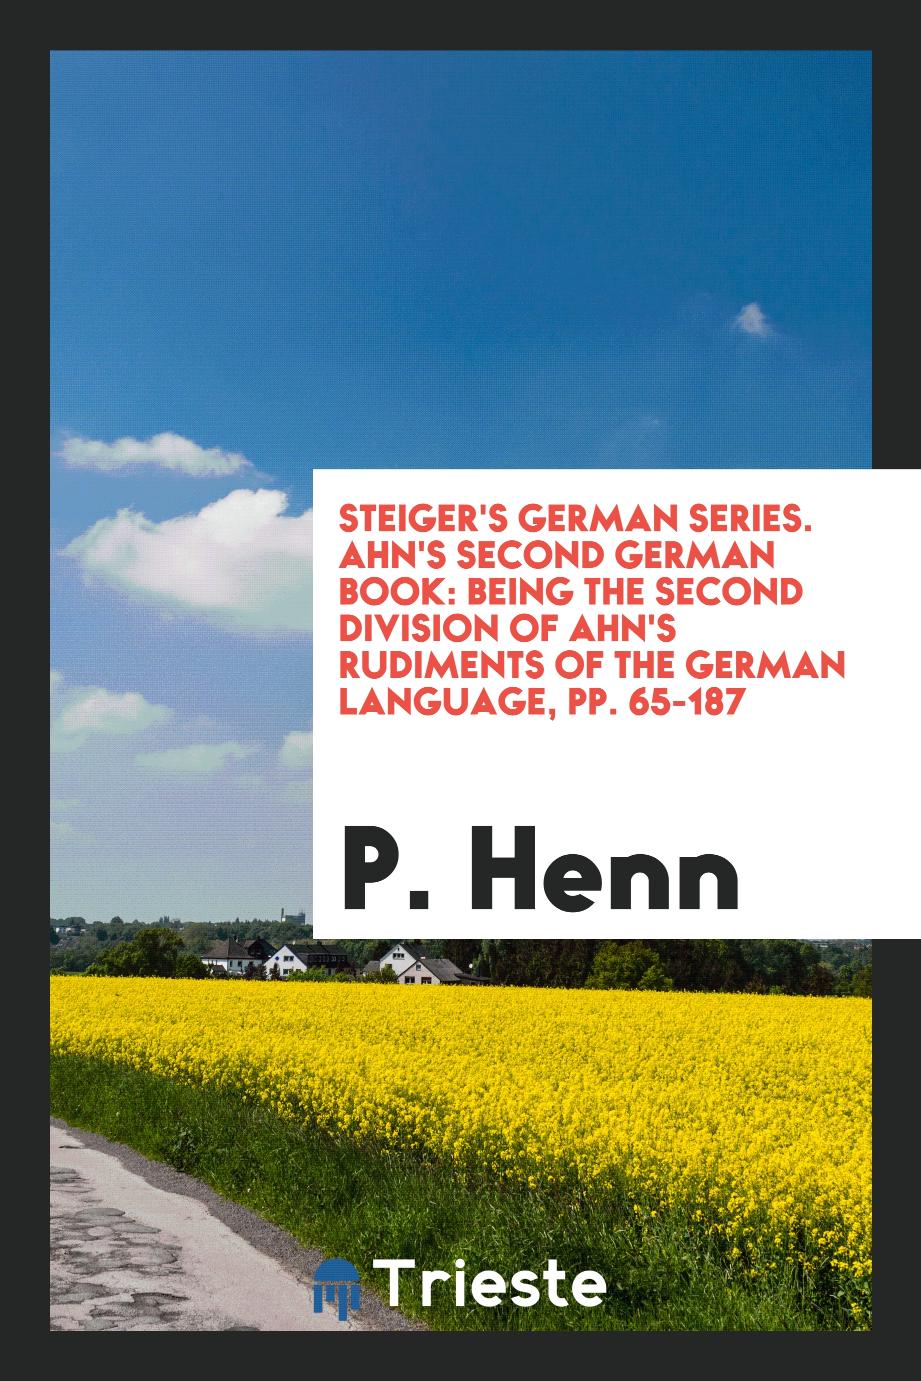 Steiger's German Series. Ahn's Second German Book: Being the Second Division of Ahn's Rudiments of the German Language, pp. 65-187